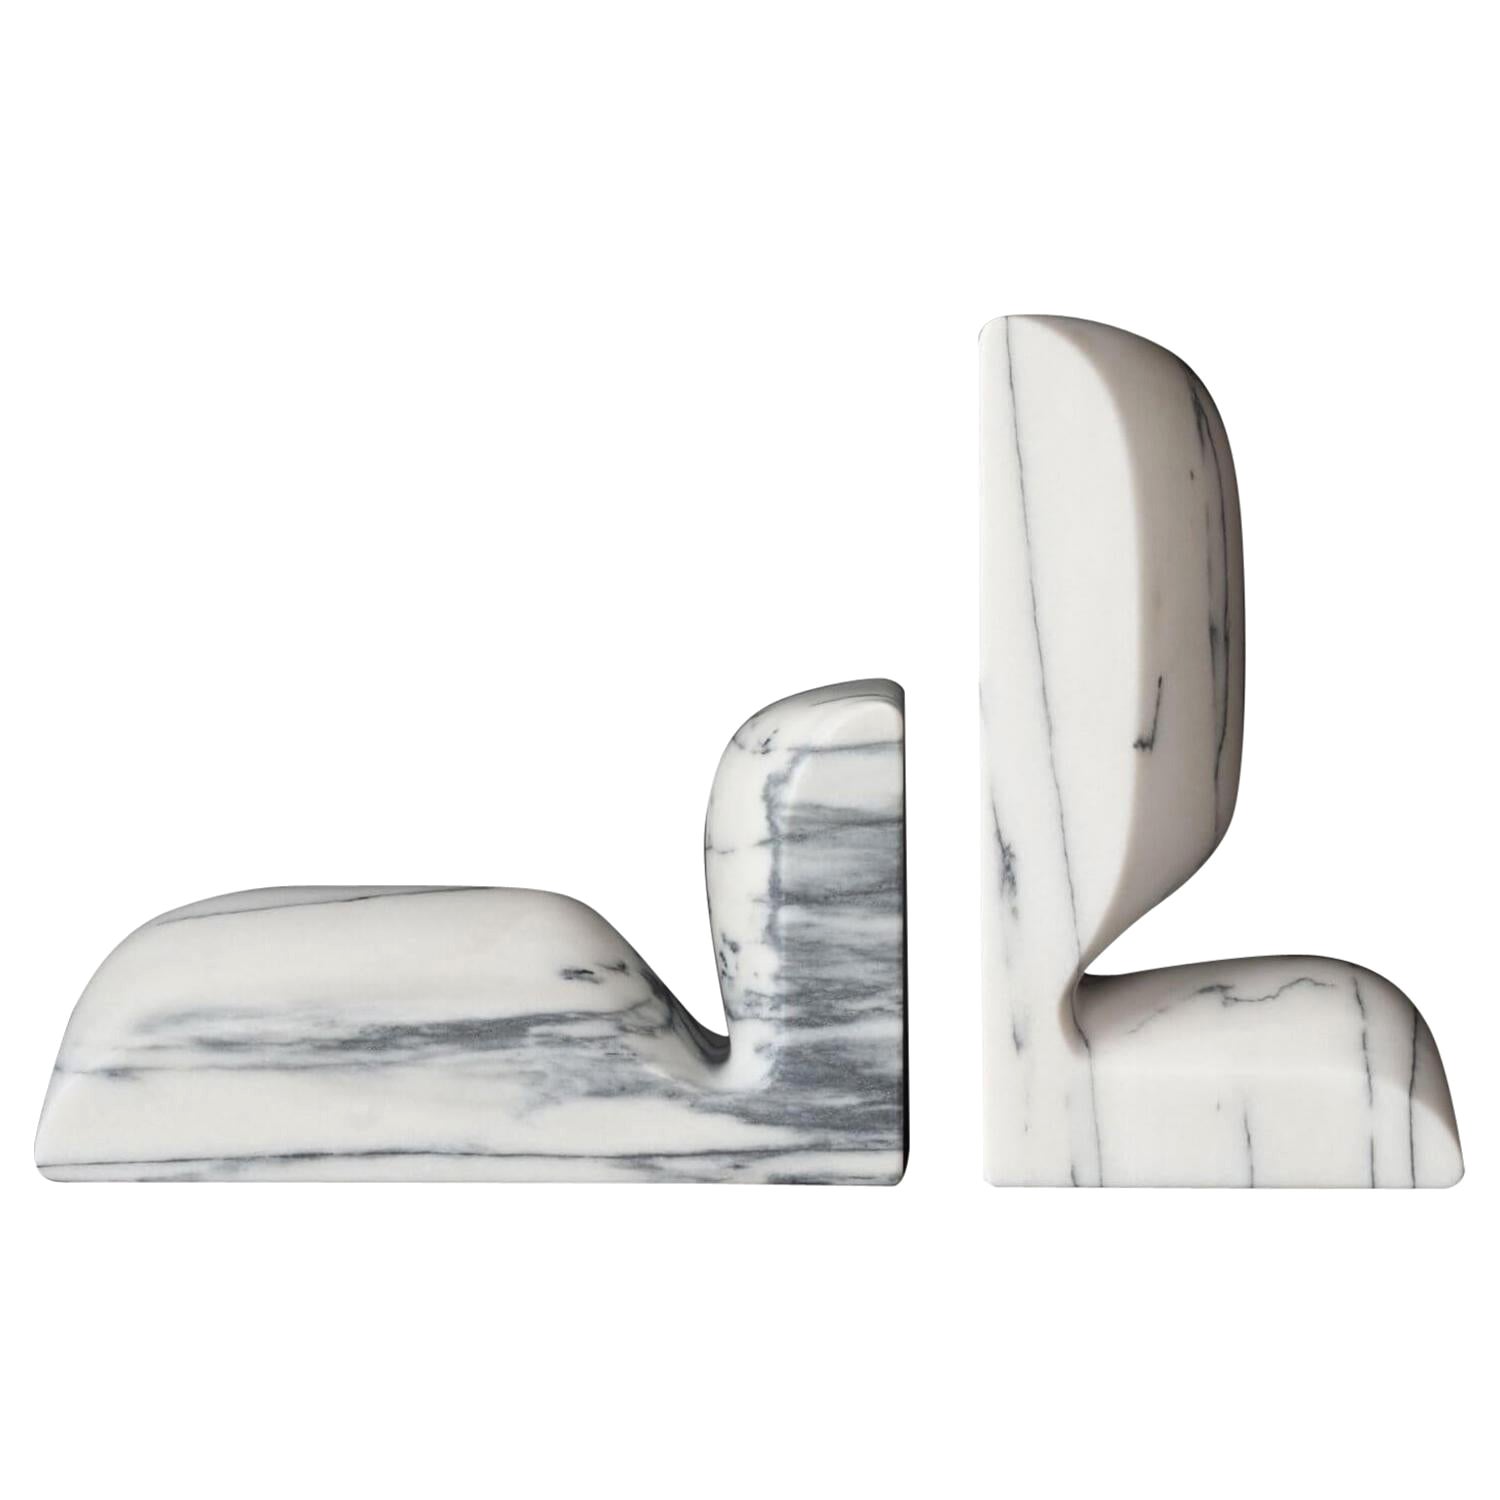 Marble 'SLO' Book Ends by Christophe Delcourt for Collection Particulière